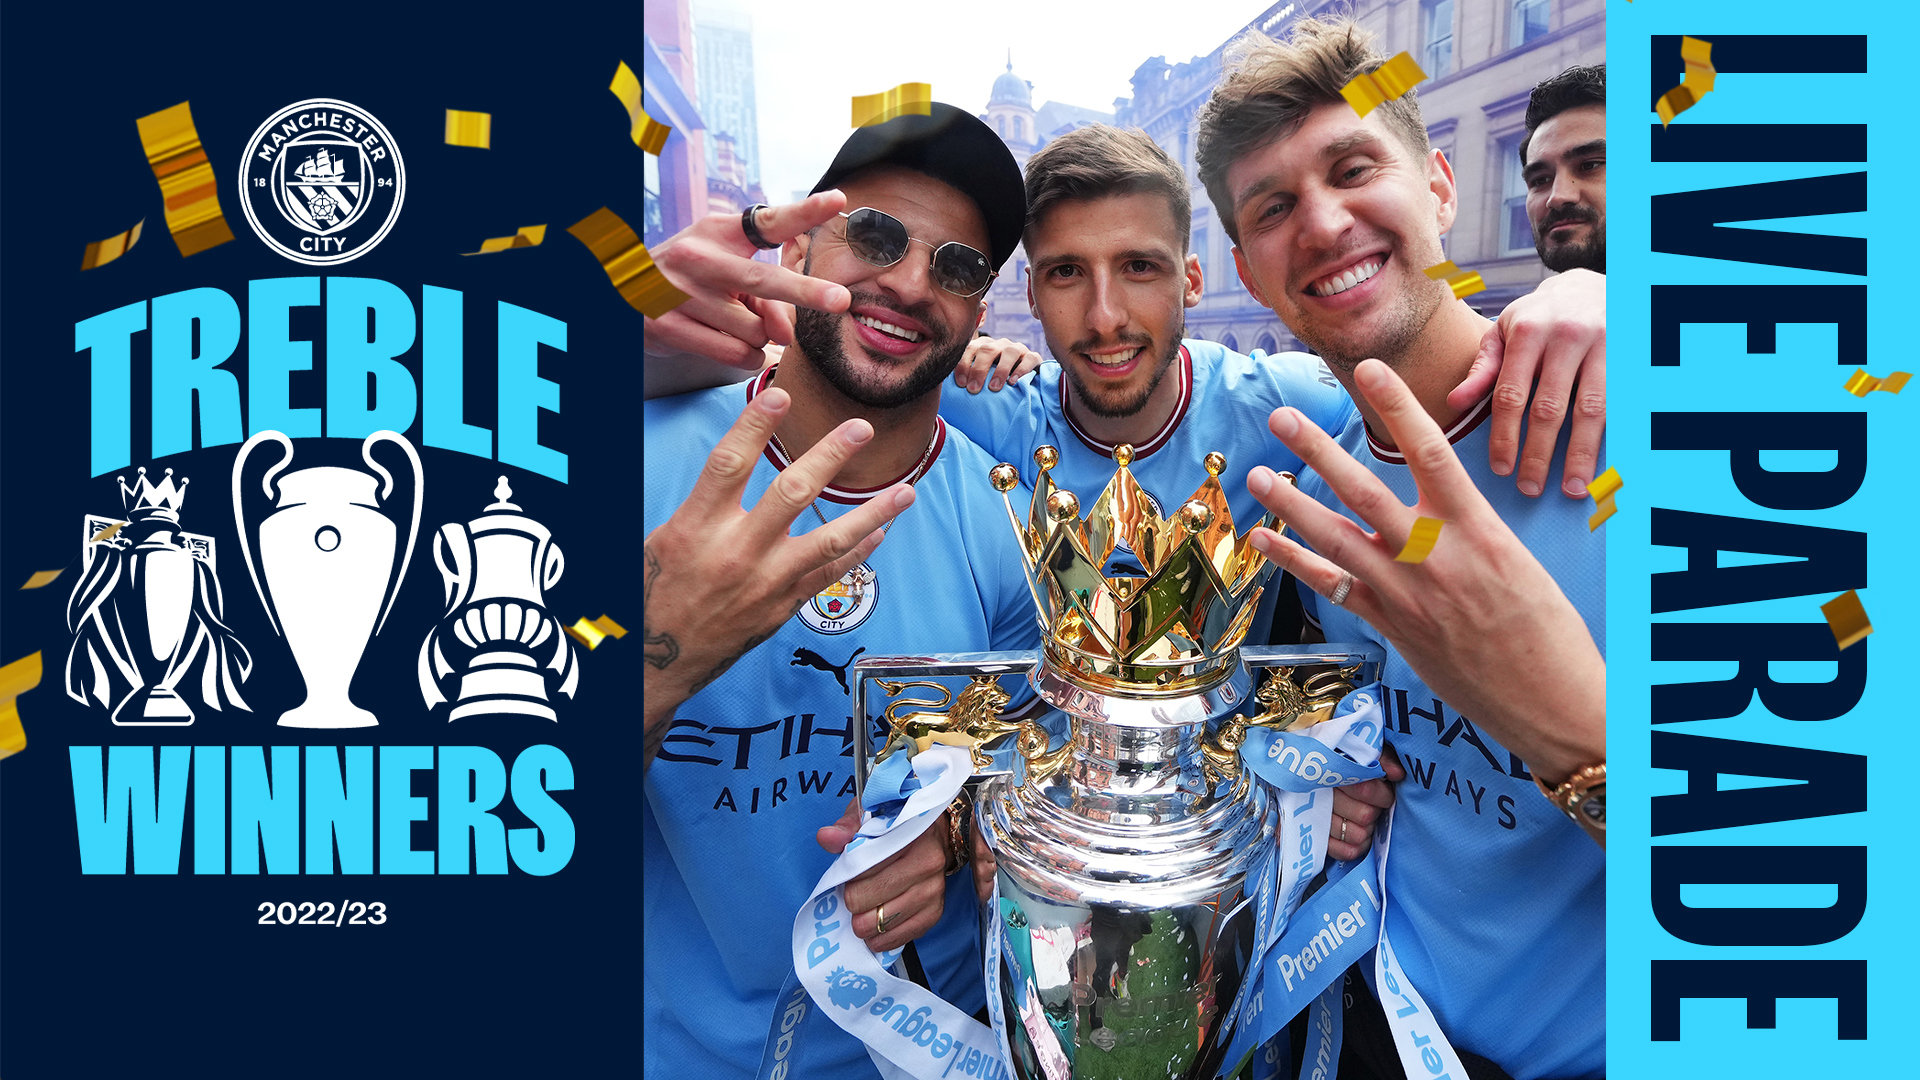 Watch live Treble winners parade in Manchester